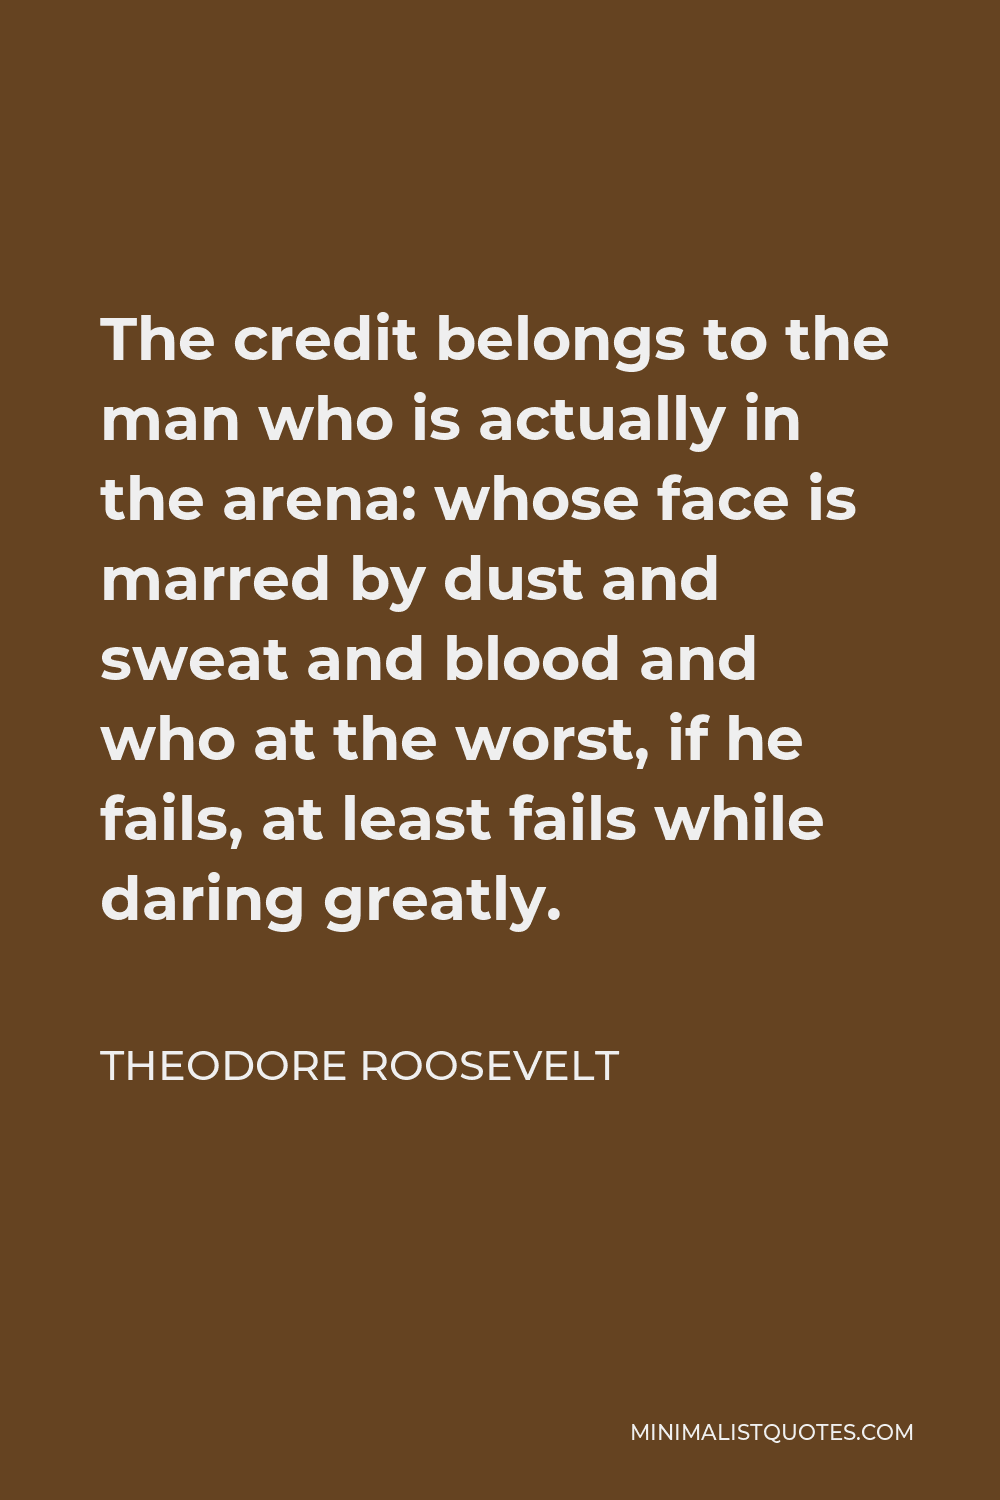 Theodore Roosevelt Quote - The credit belongs to the man who is actually in the arena: whose face is marred by dust and sweat and blood and who at the worst, if he fails, at least fails while daring greatly.